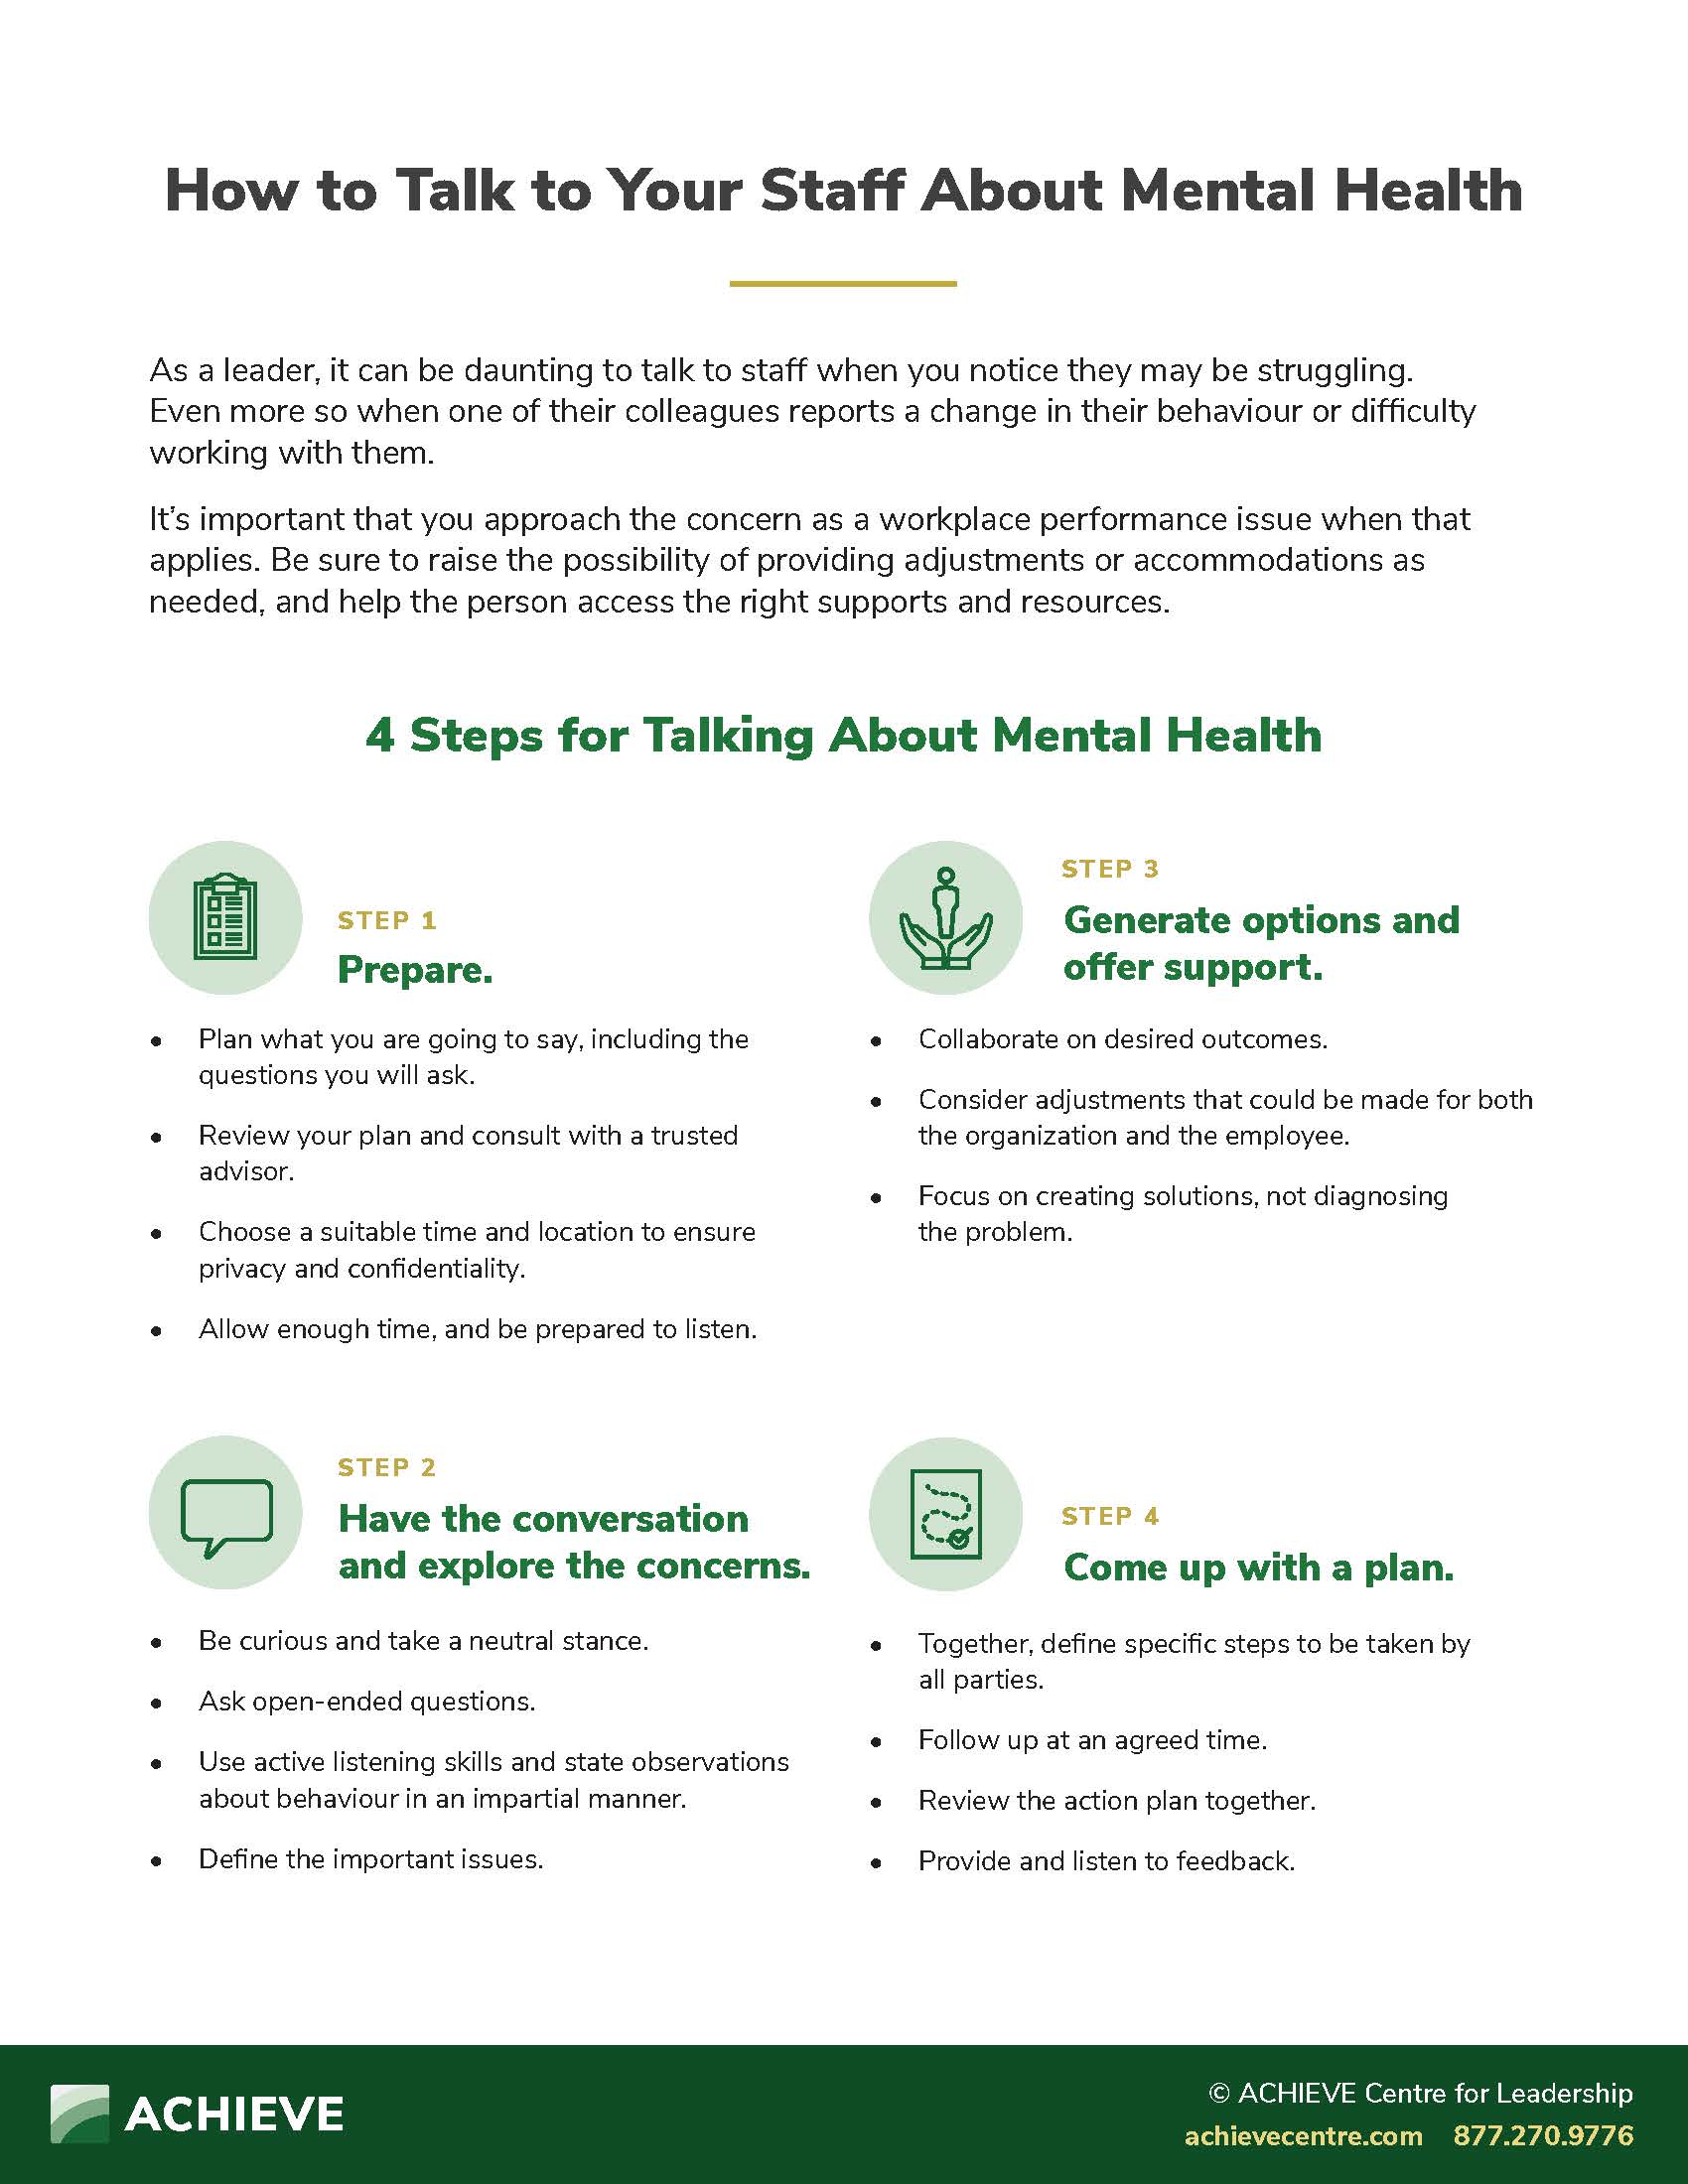 How to Talk to Your Staff About Mental Health Icon